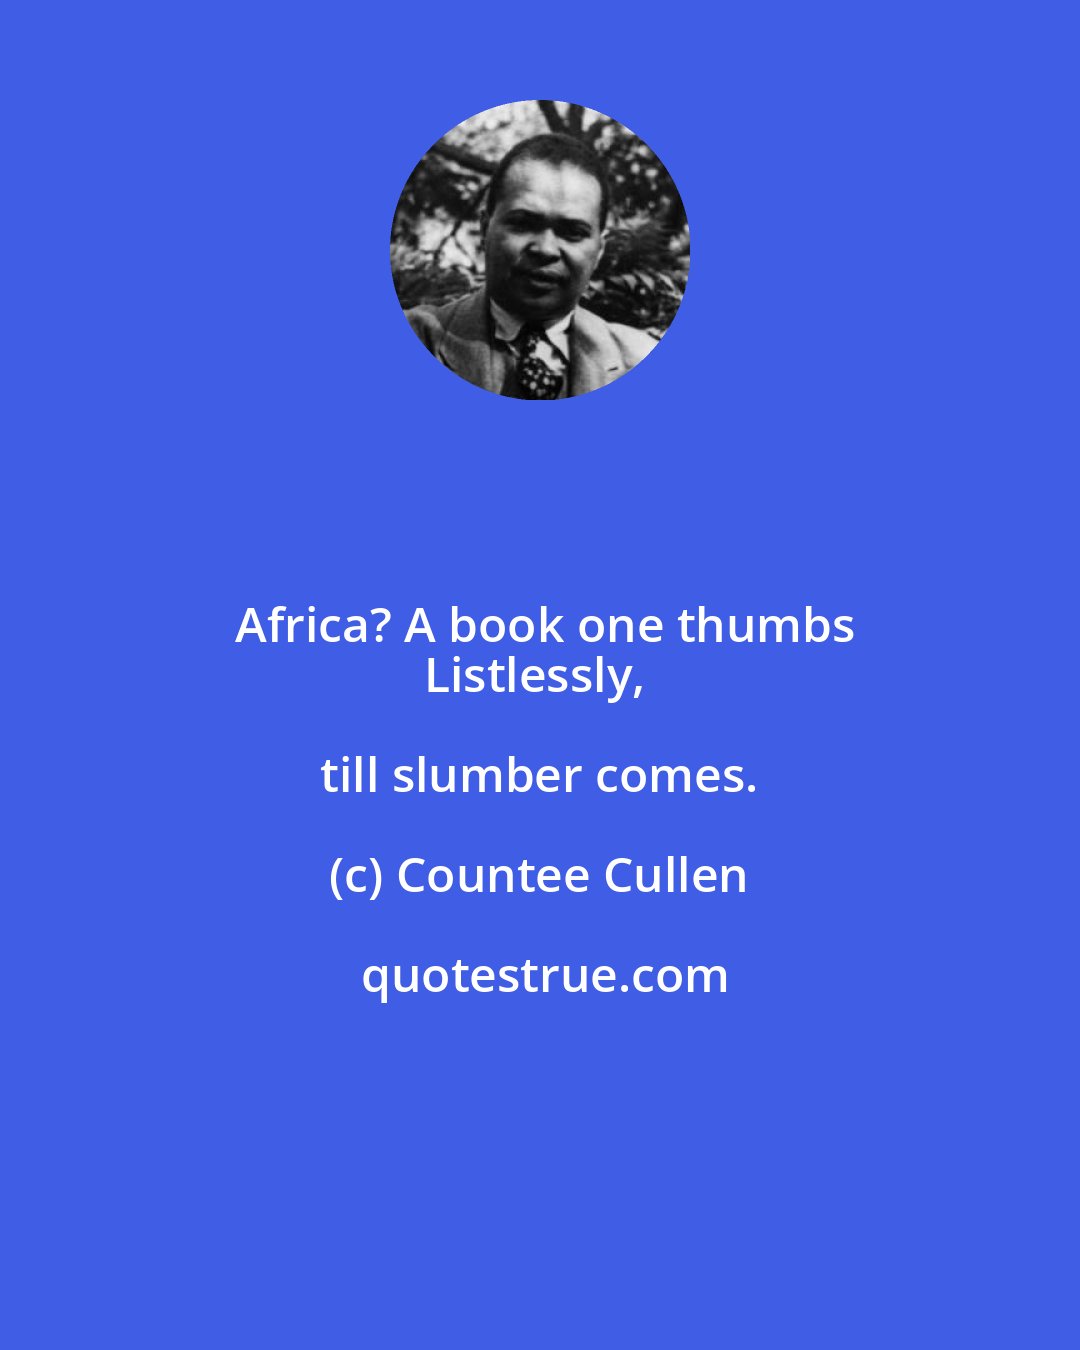 Countee Cullen: Africa? A book one thumbs
Listlessly, till slumber comes.